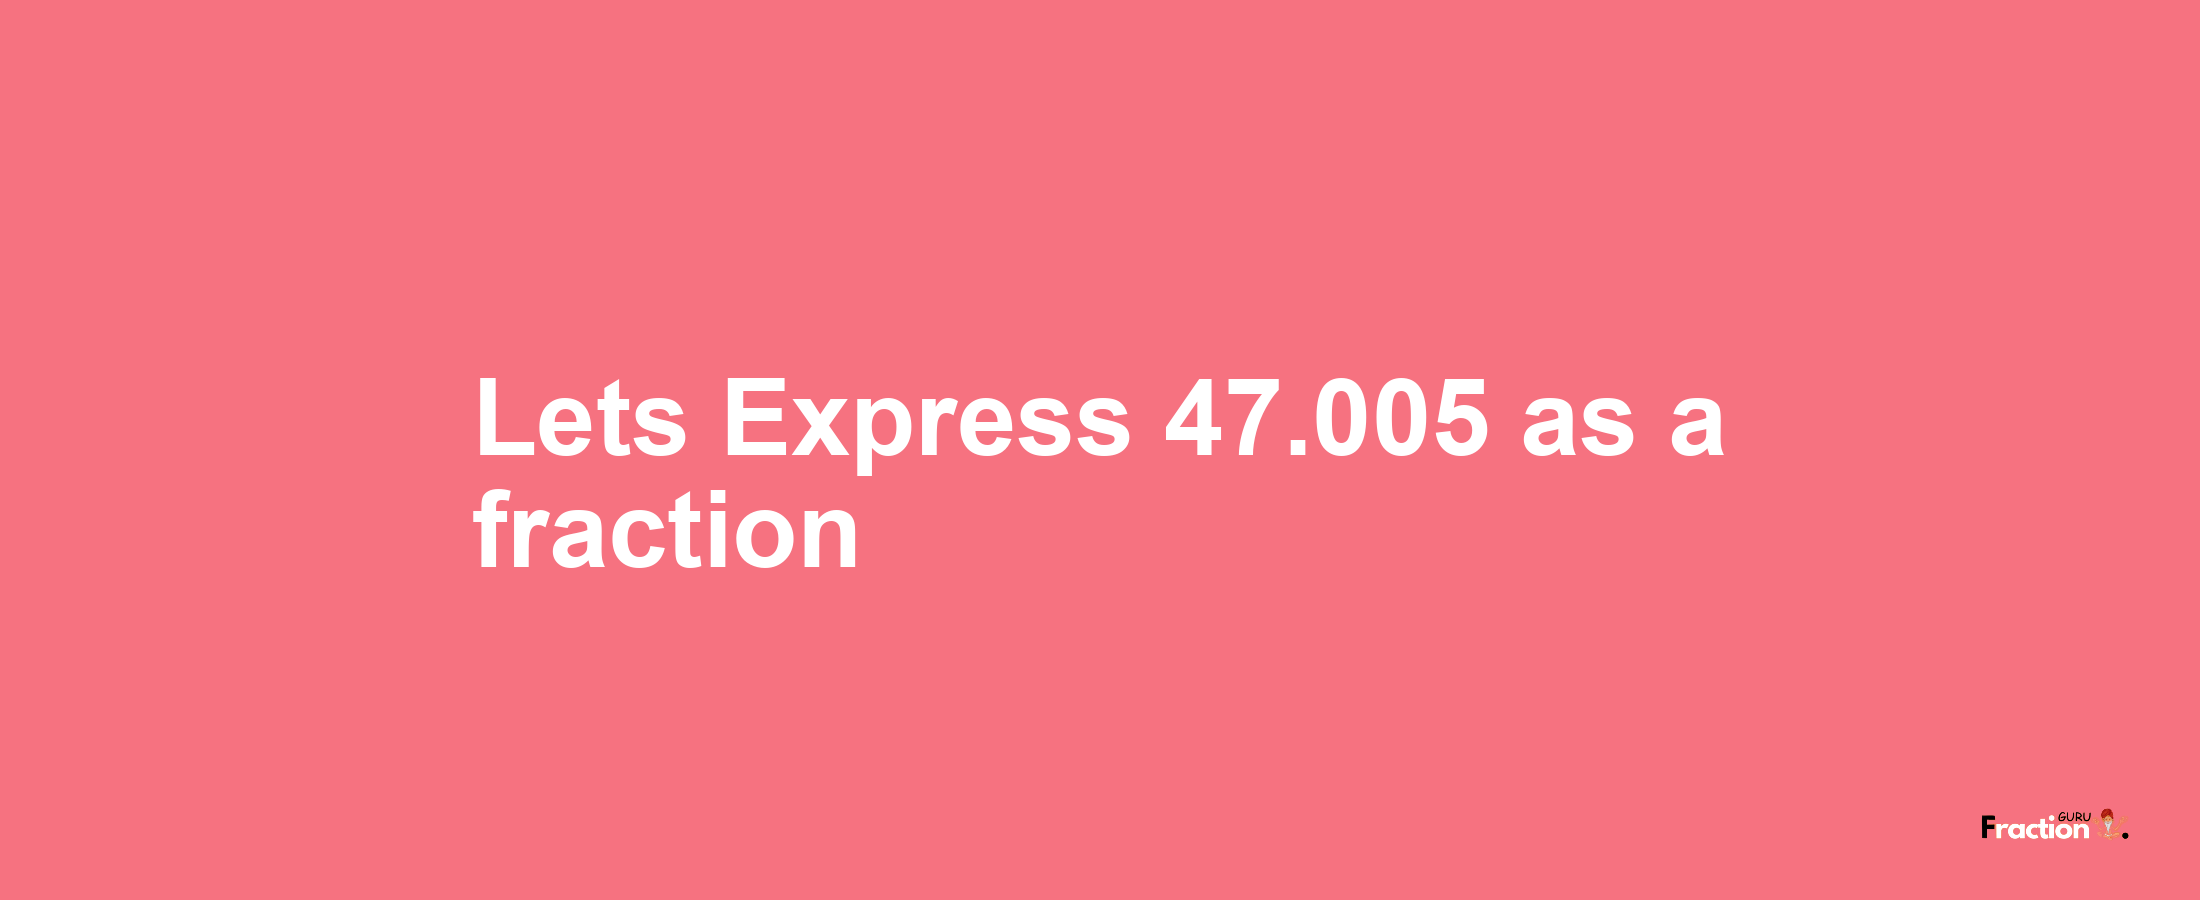 Lets Express 47.005 as afraction